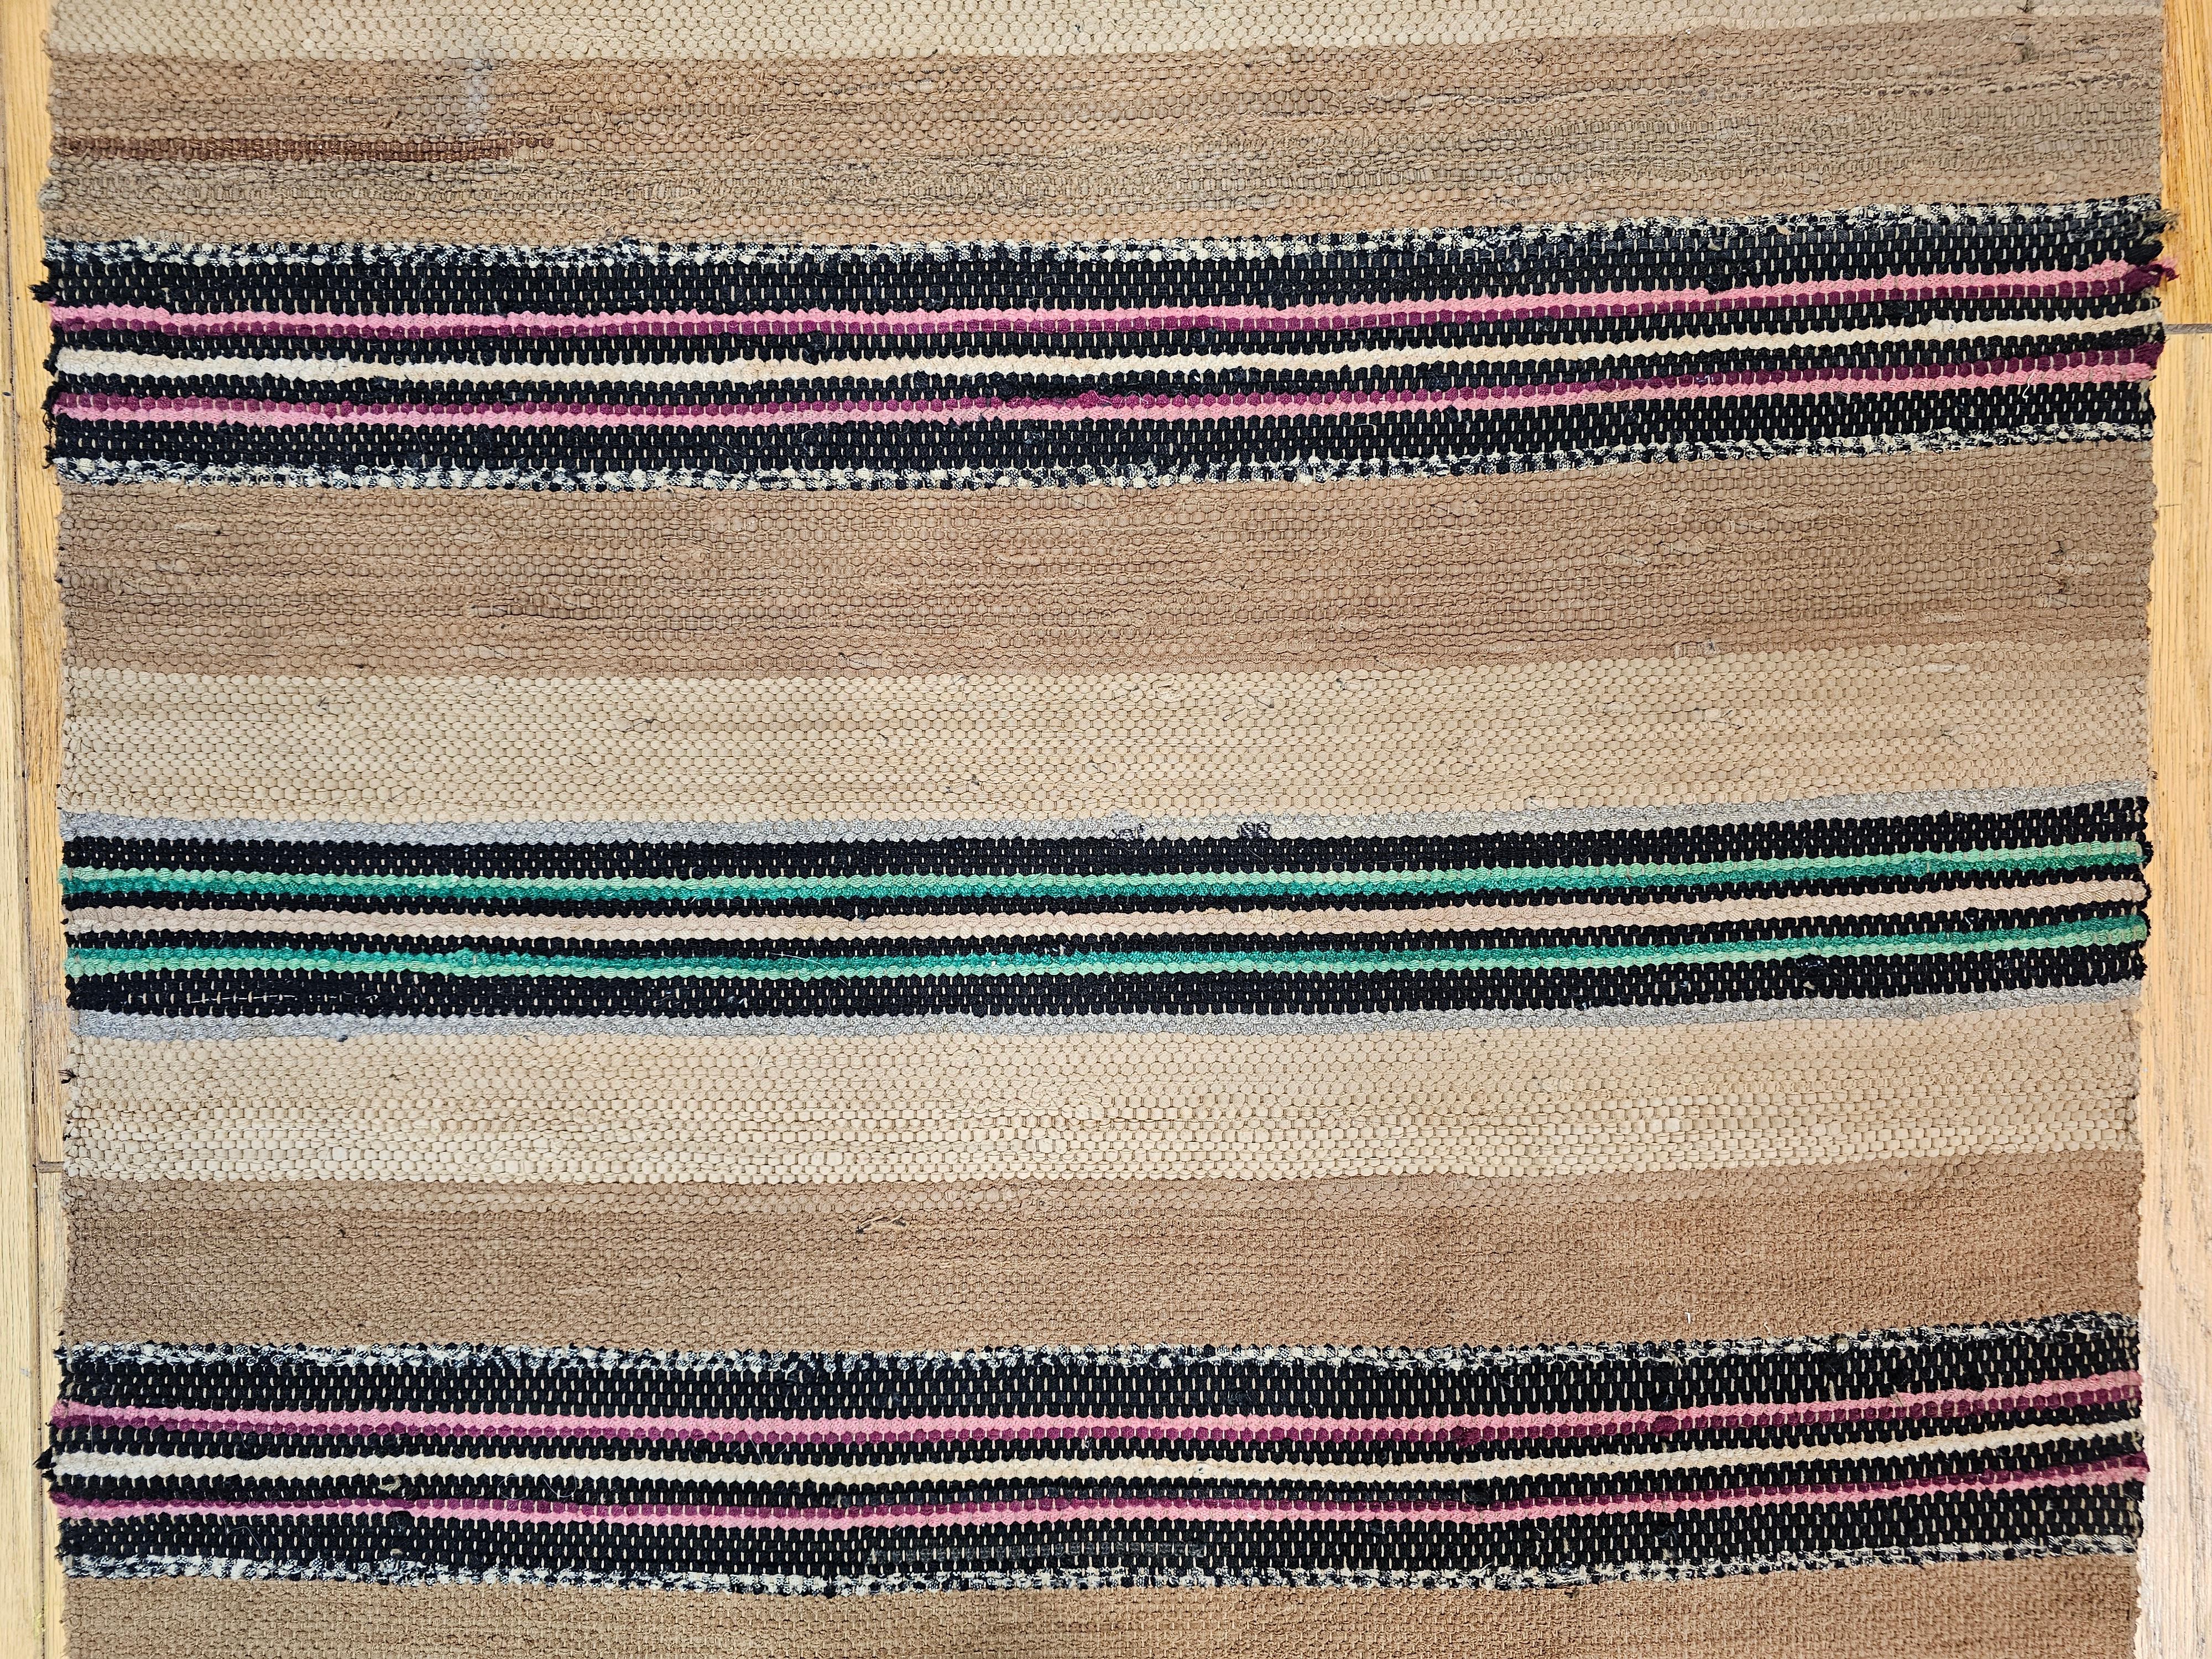 Vintage American Rag Runner in Stripe Pattern in Green, Pink, Tan, Cream In Good Condition For Sale In Barrington, IL